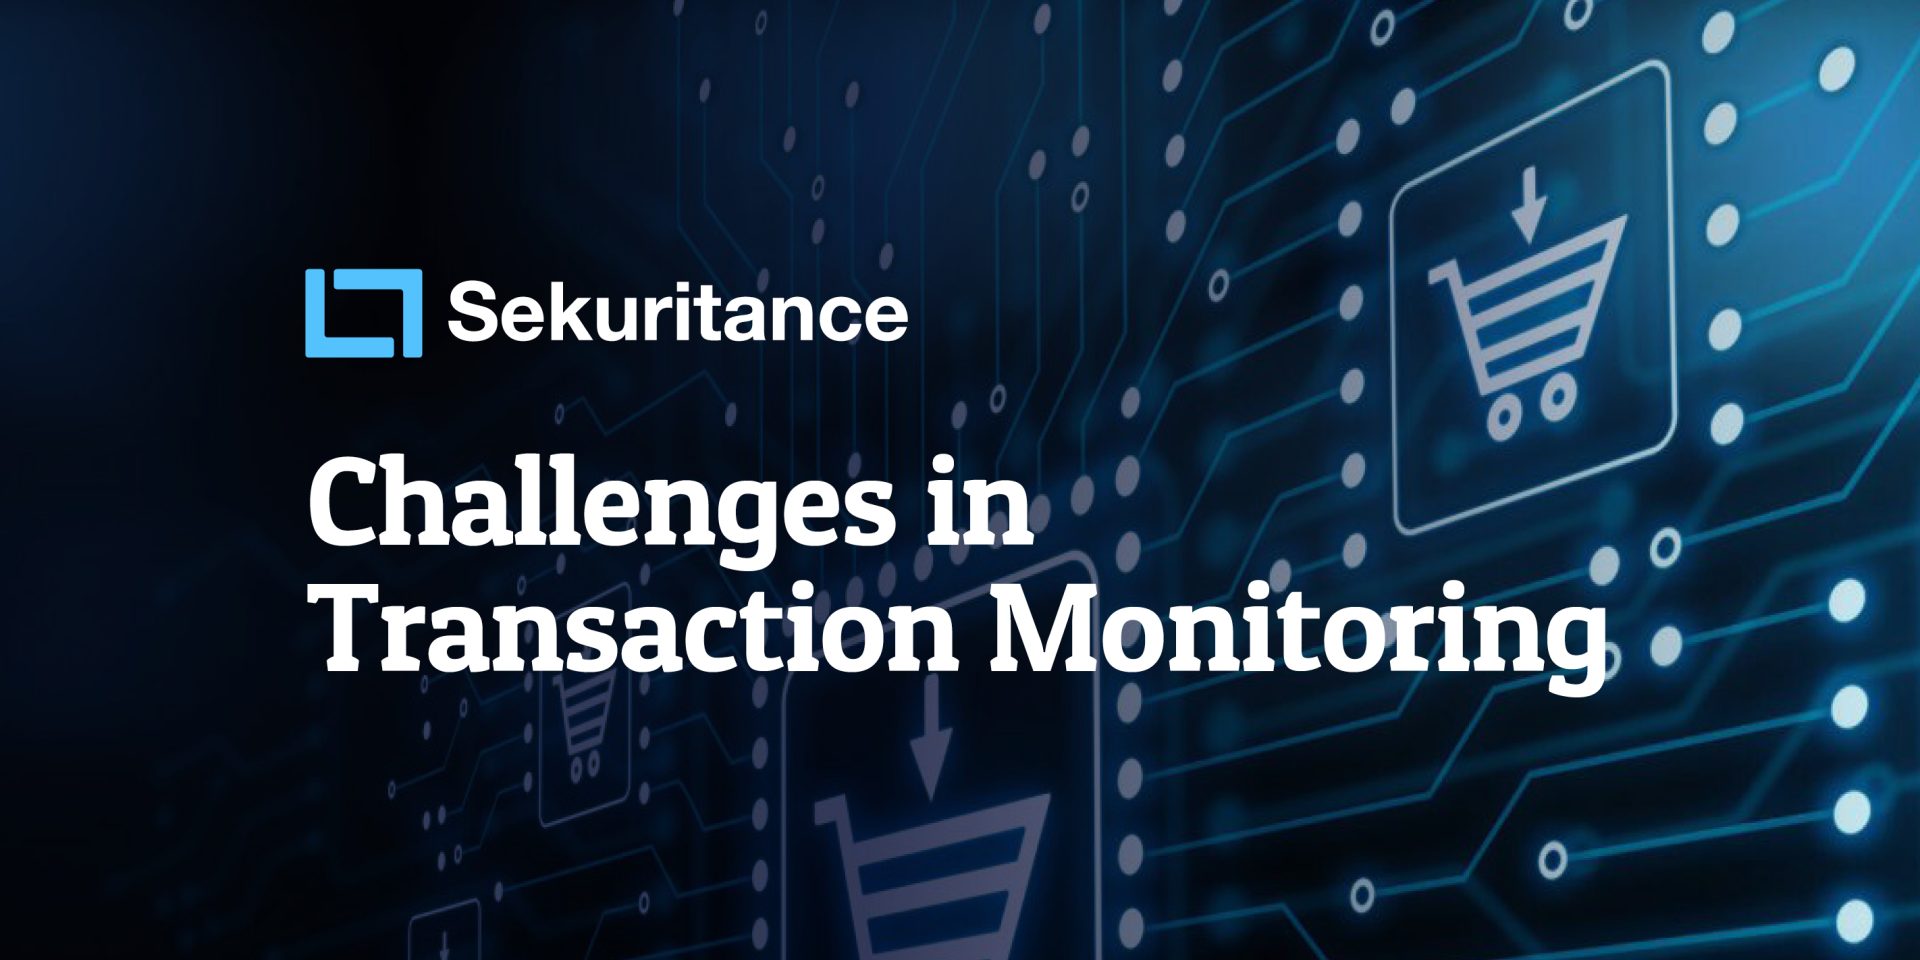 The Challenges of Transaction Monitoring